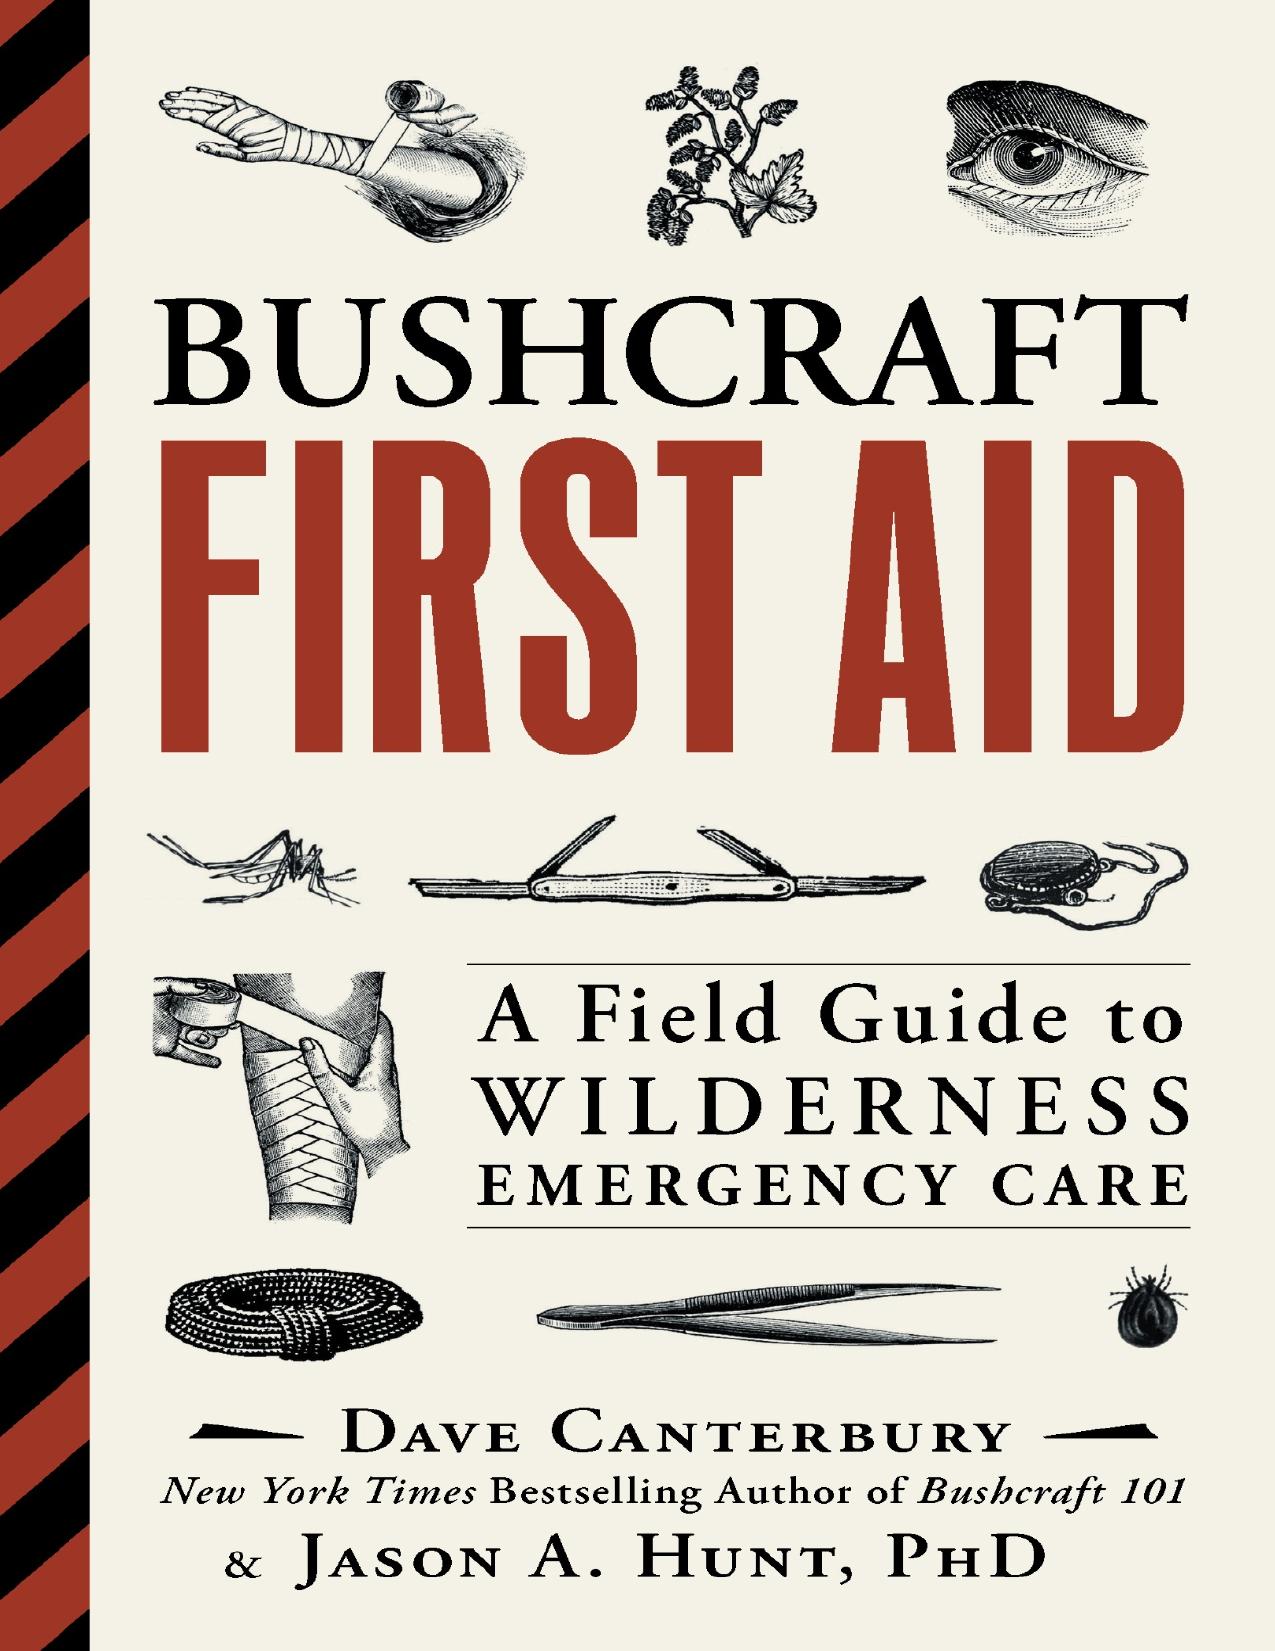 Bushcraft First Aid: A Field Guide to Wilderness Emergency Care - PDFDrive.com